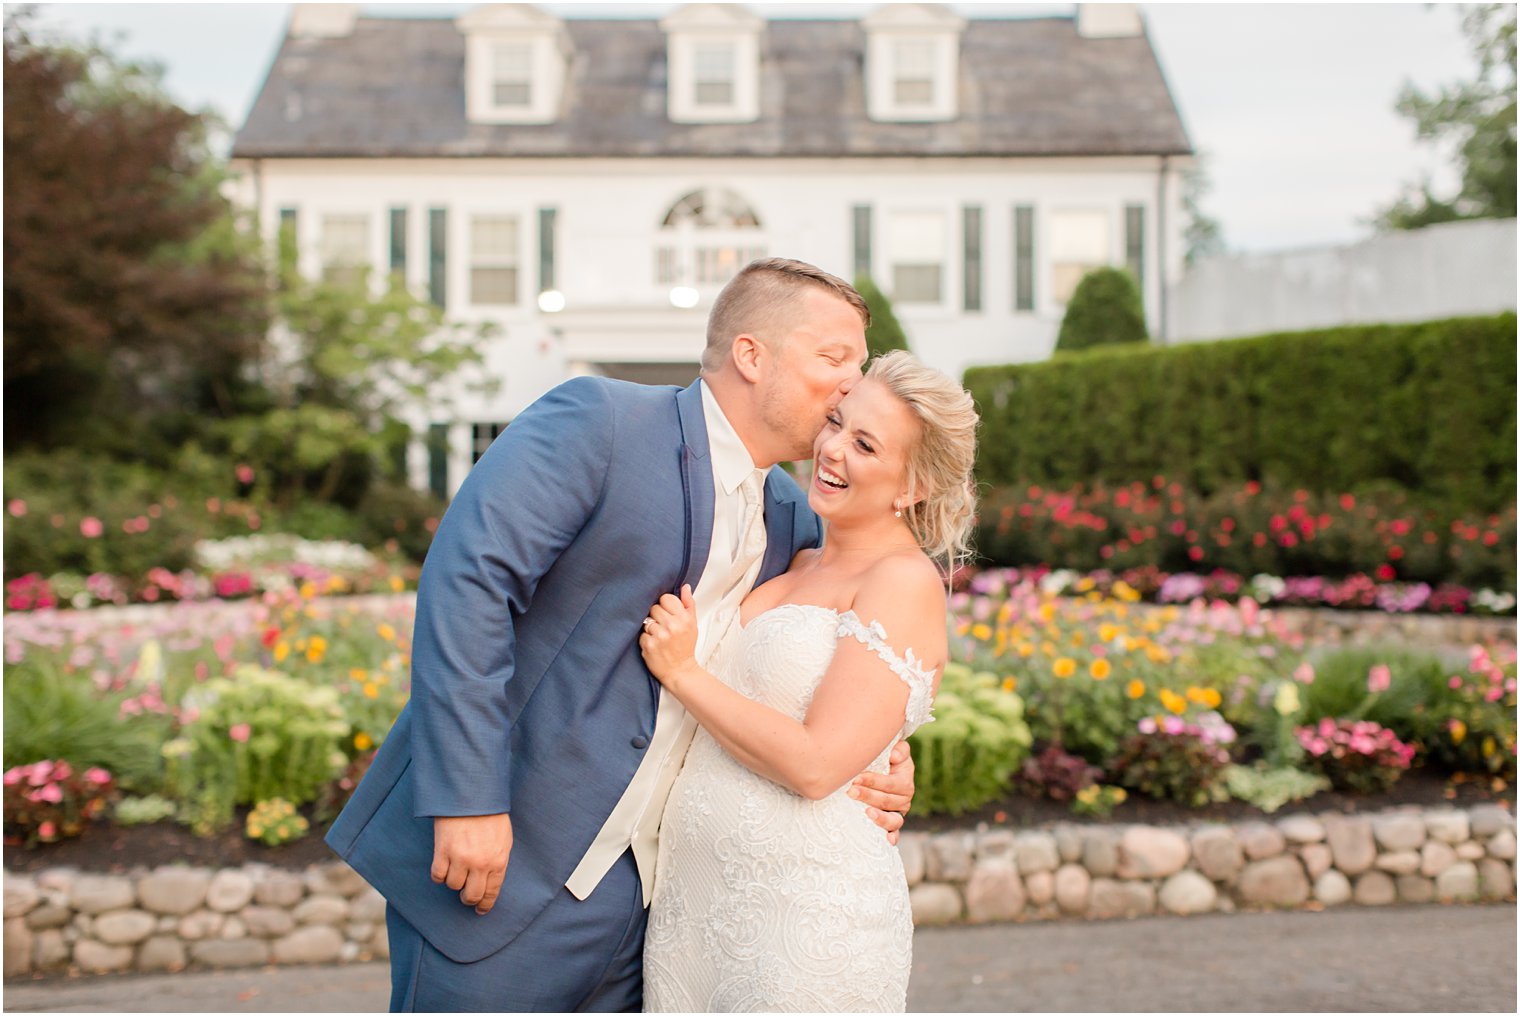 Golden hour portraits at The English Manor in Ocean, NJ